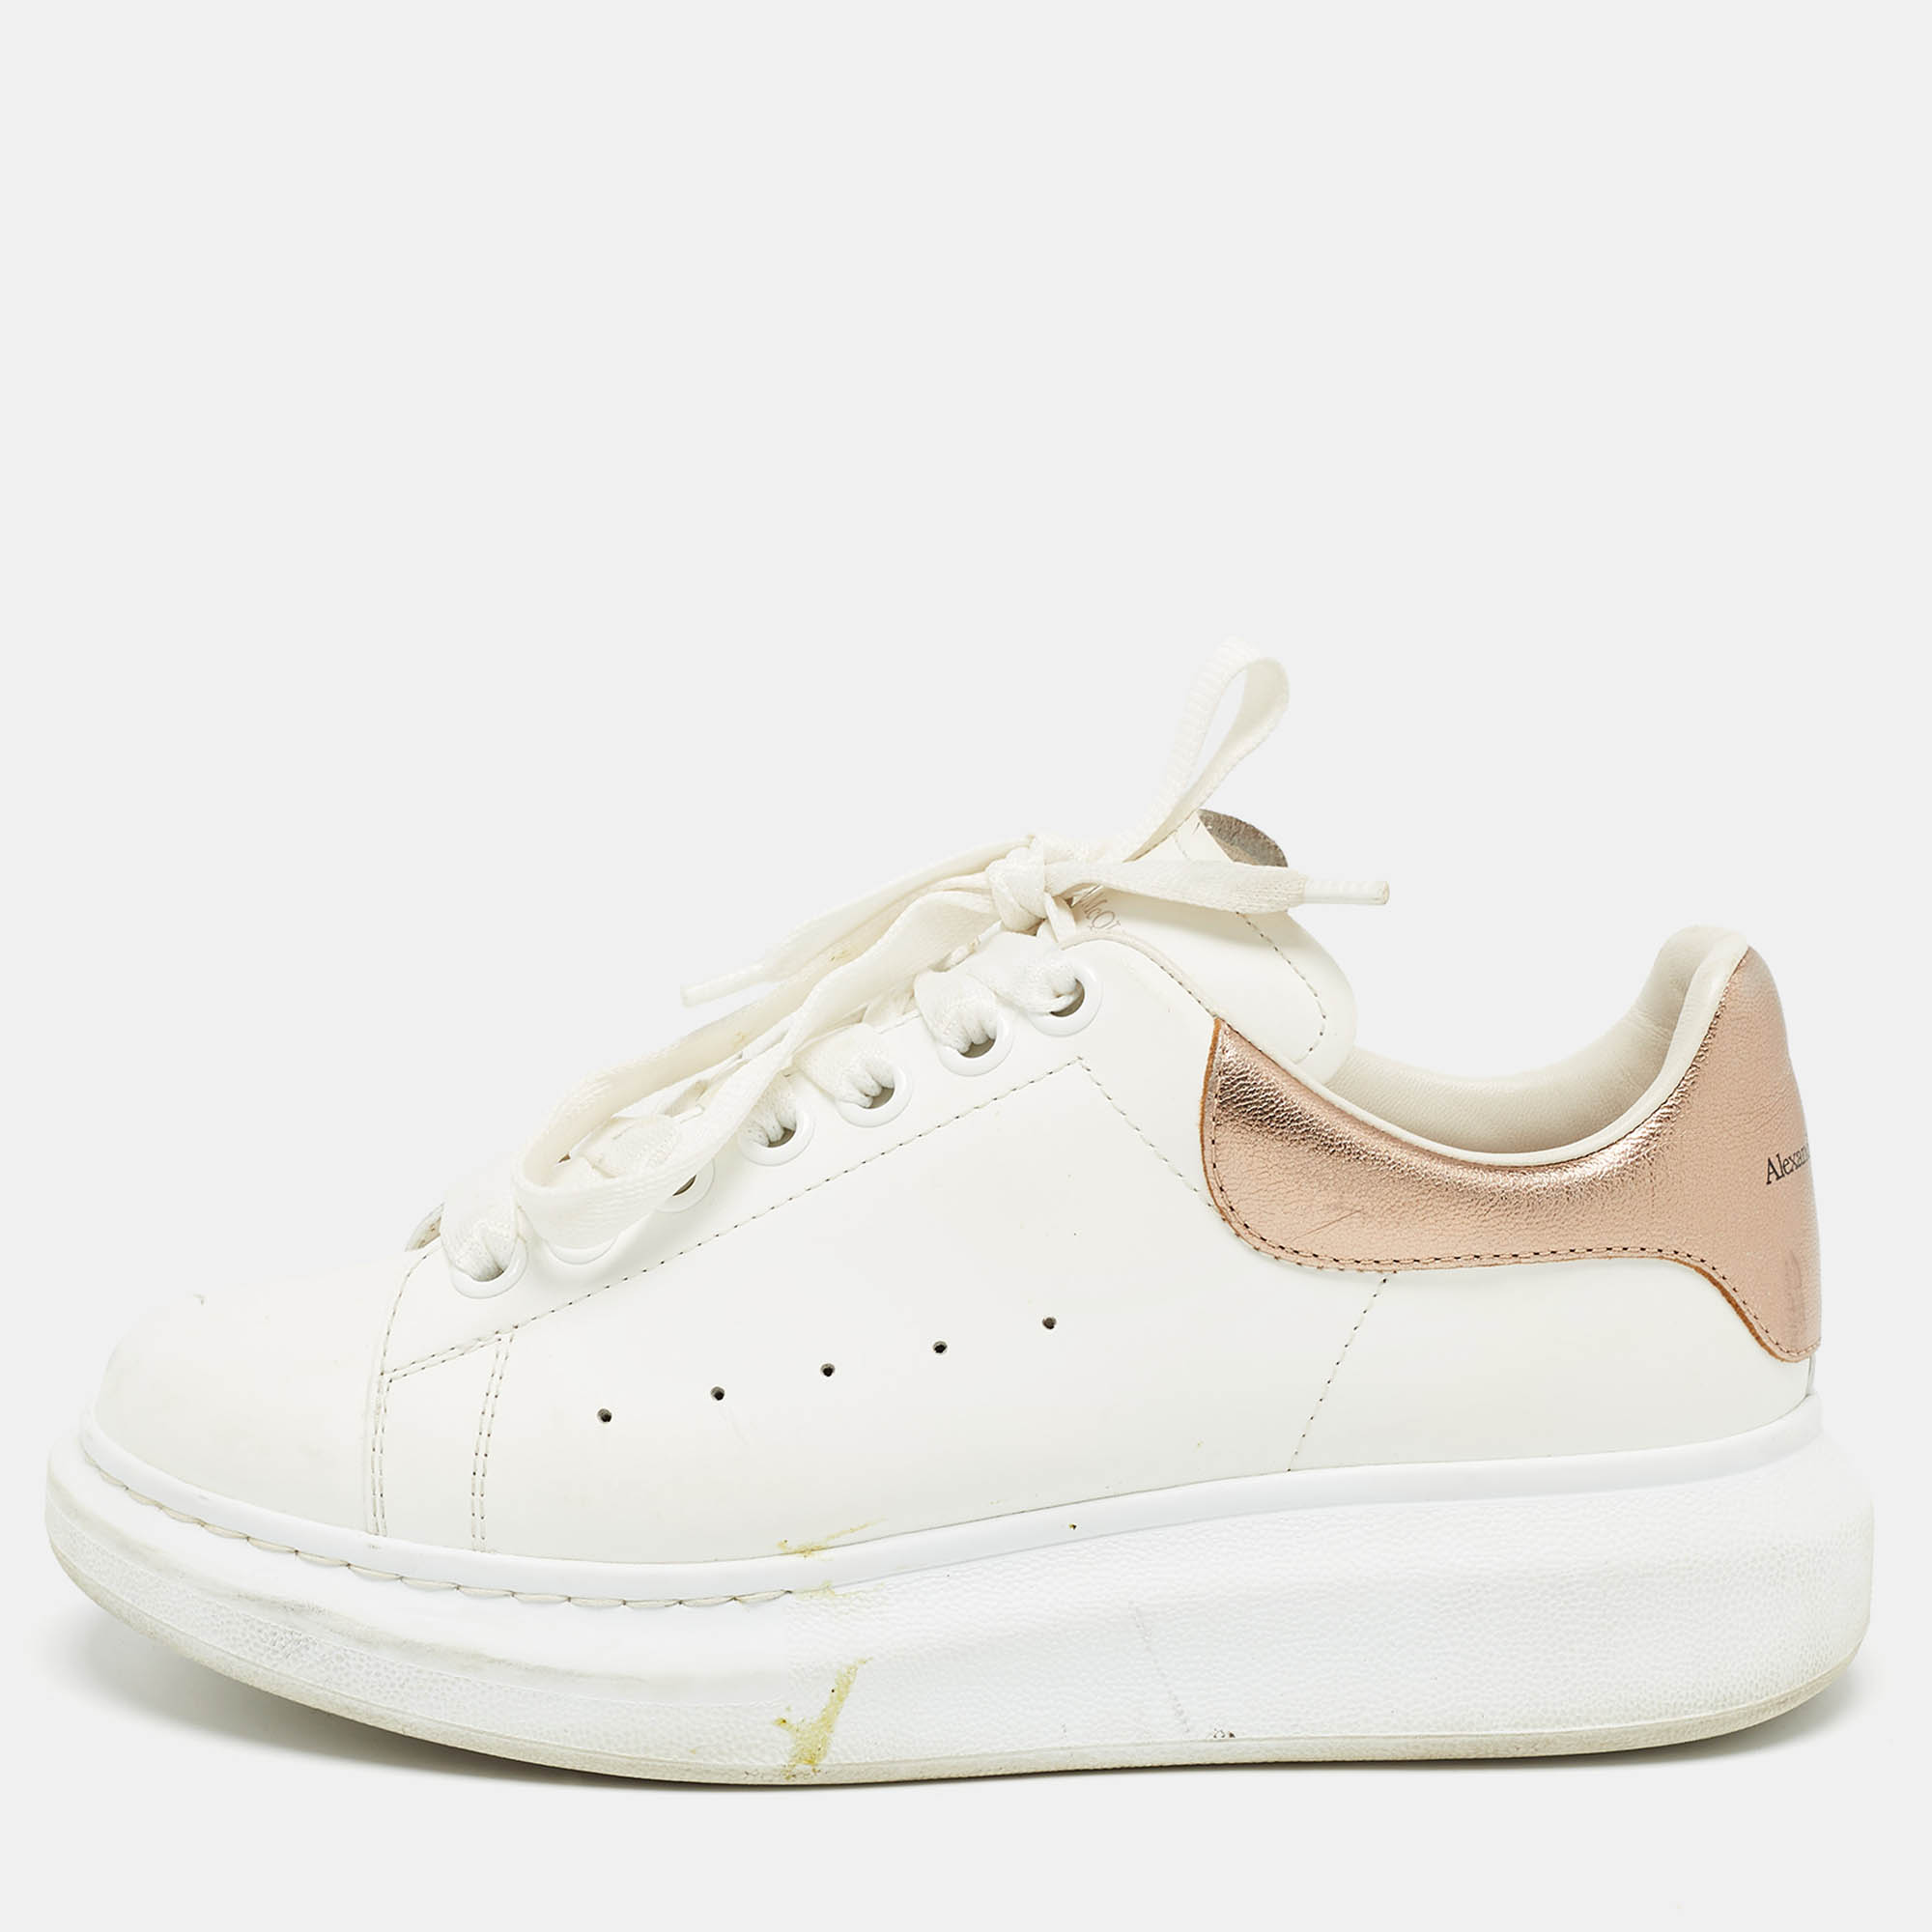 Alexander McQueen White Leather Oversized  Sneakers Size 38